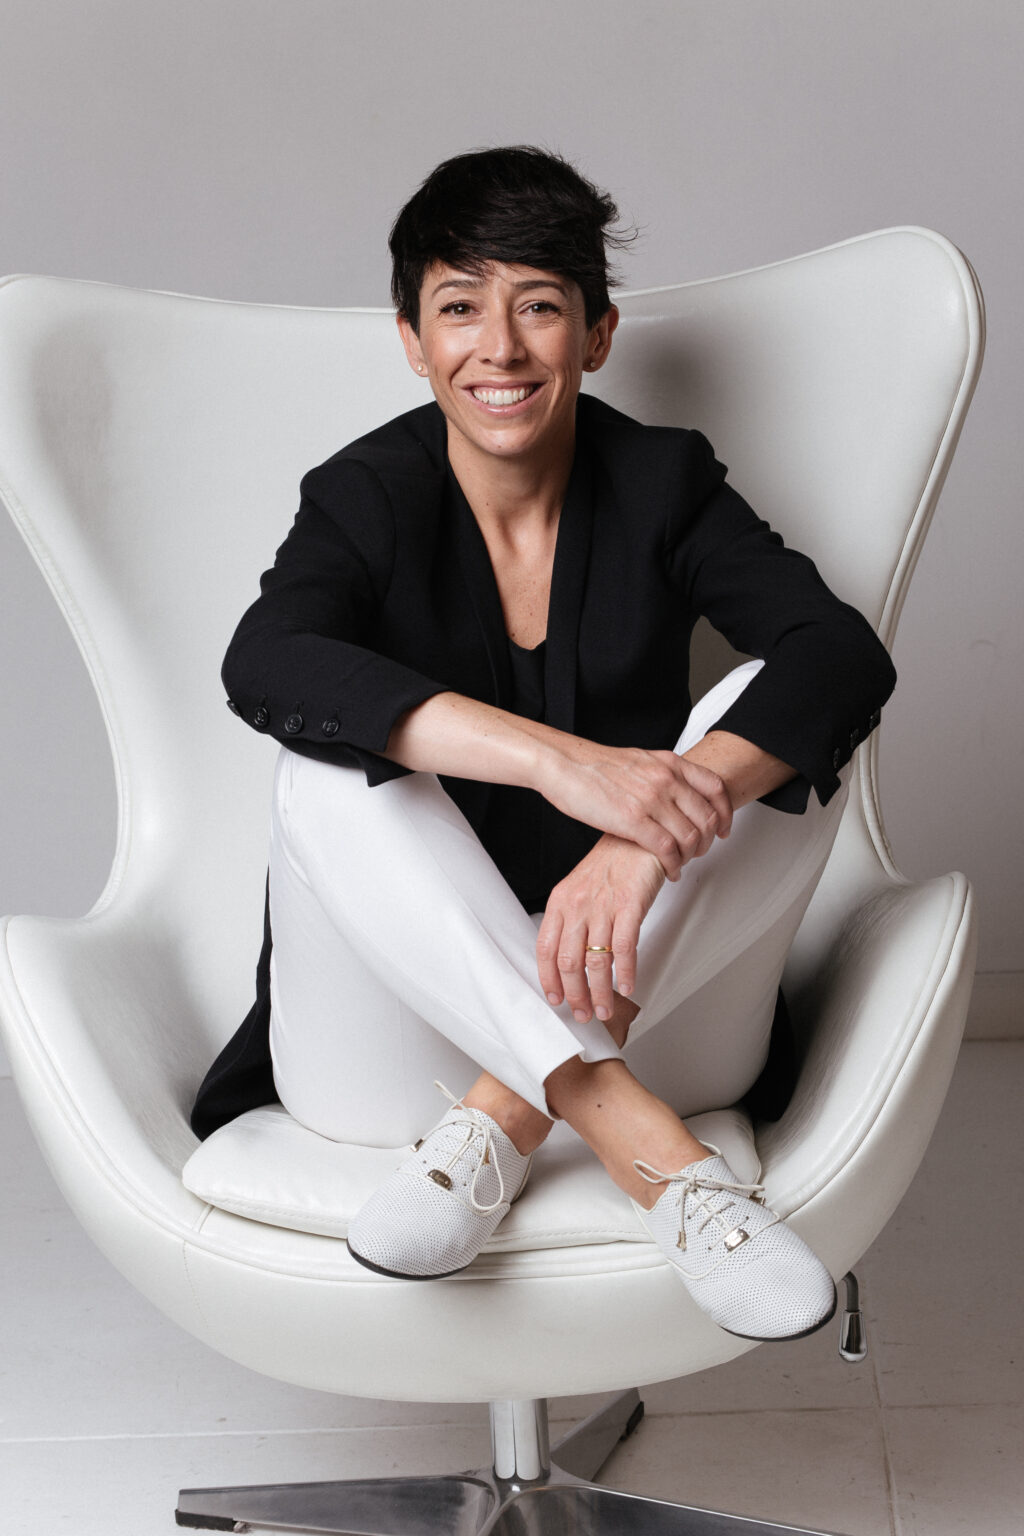 Gala Magrina in a modern chair wearing black and white